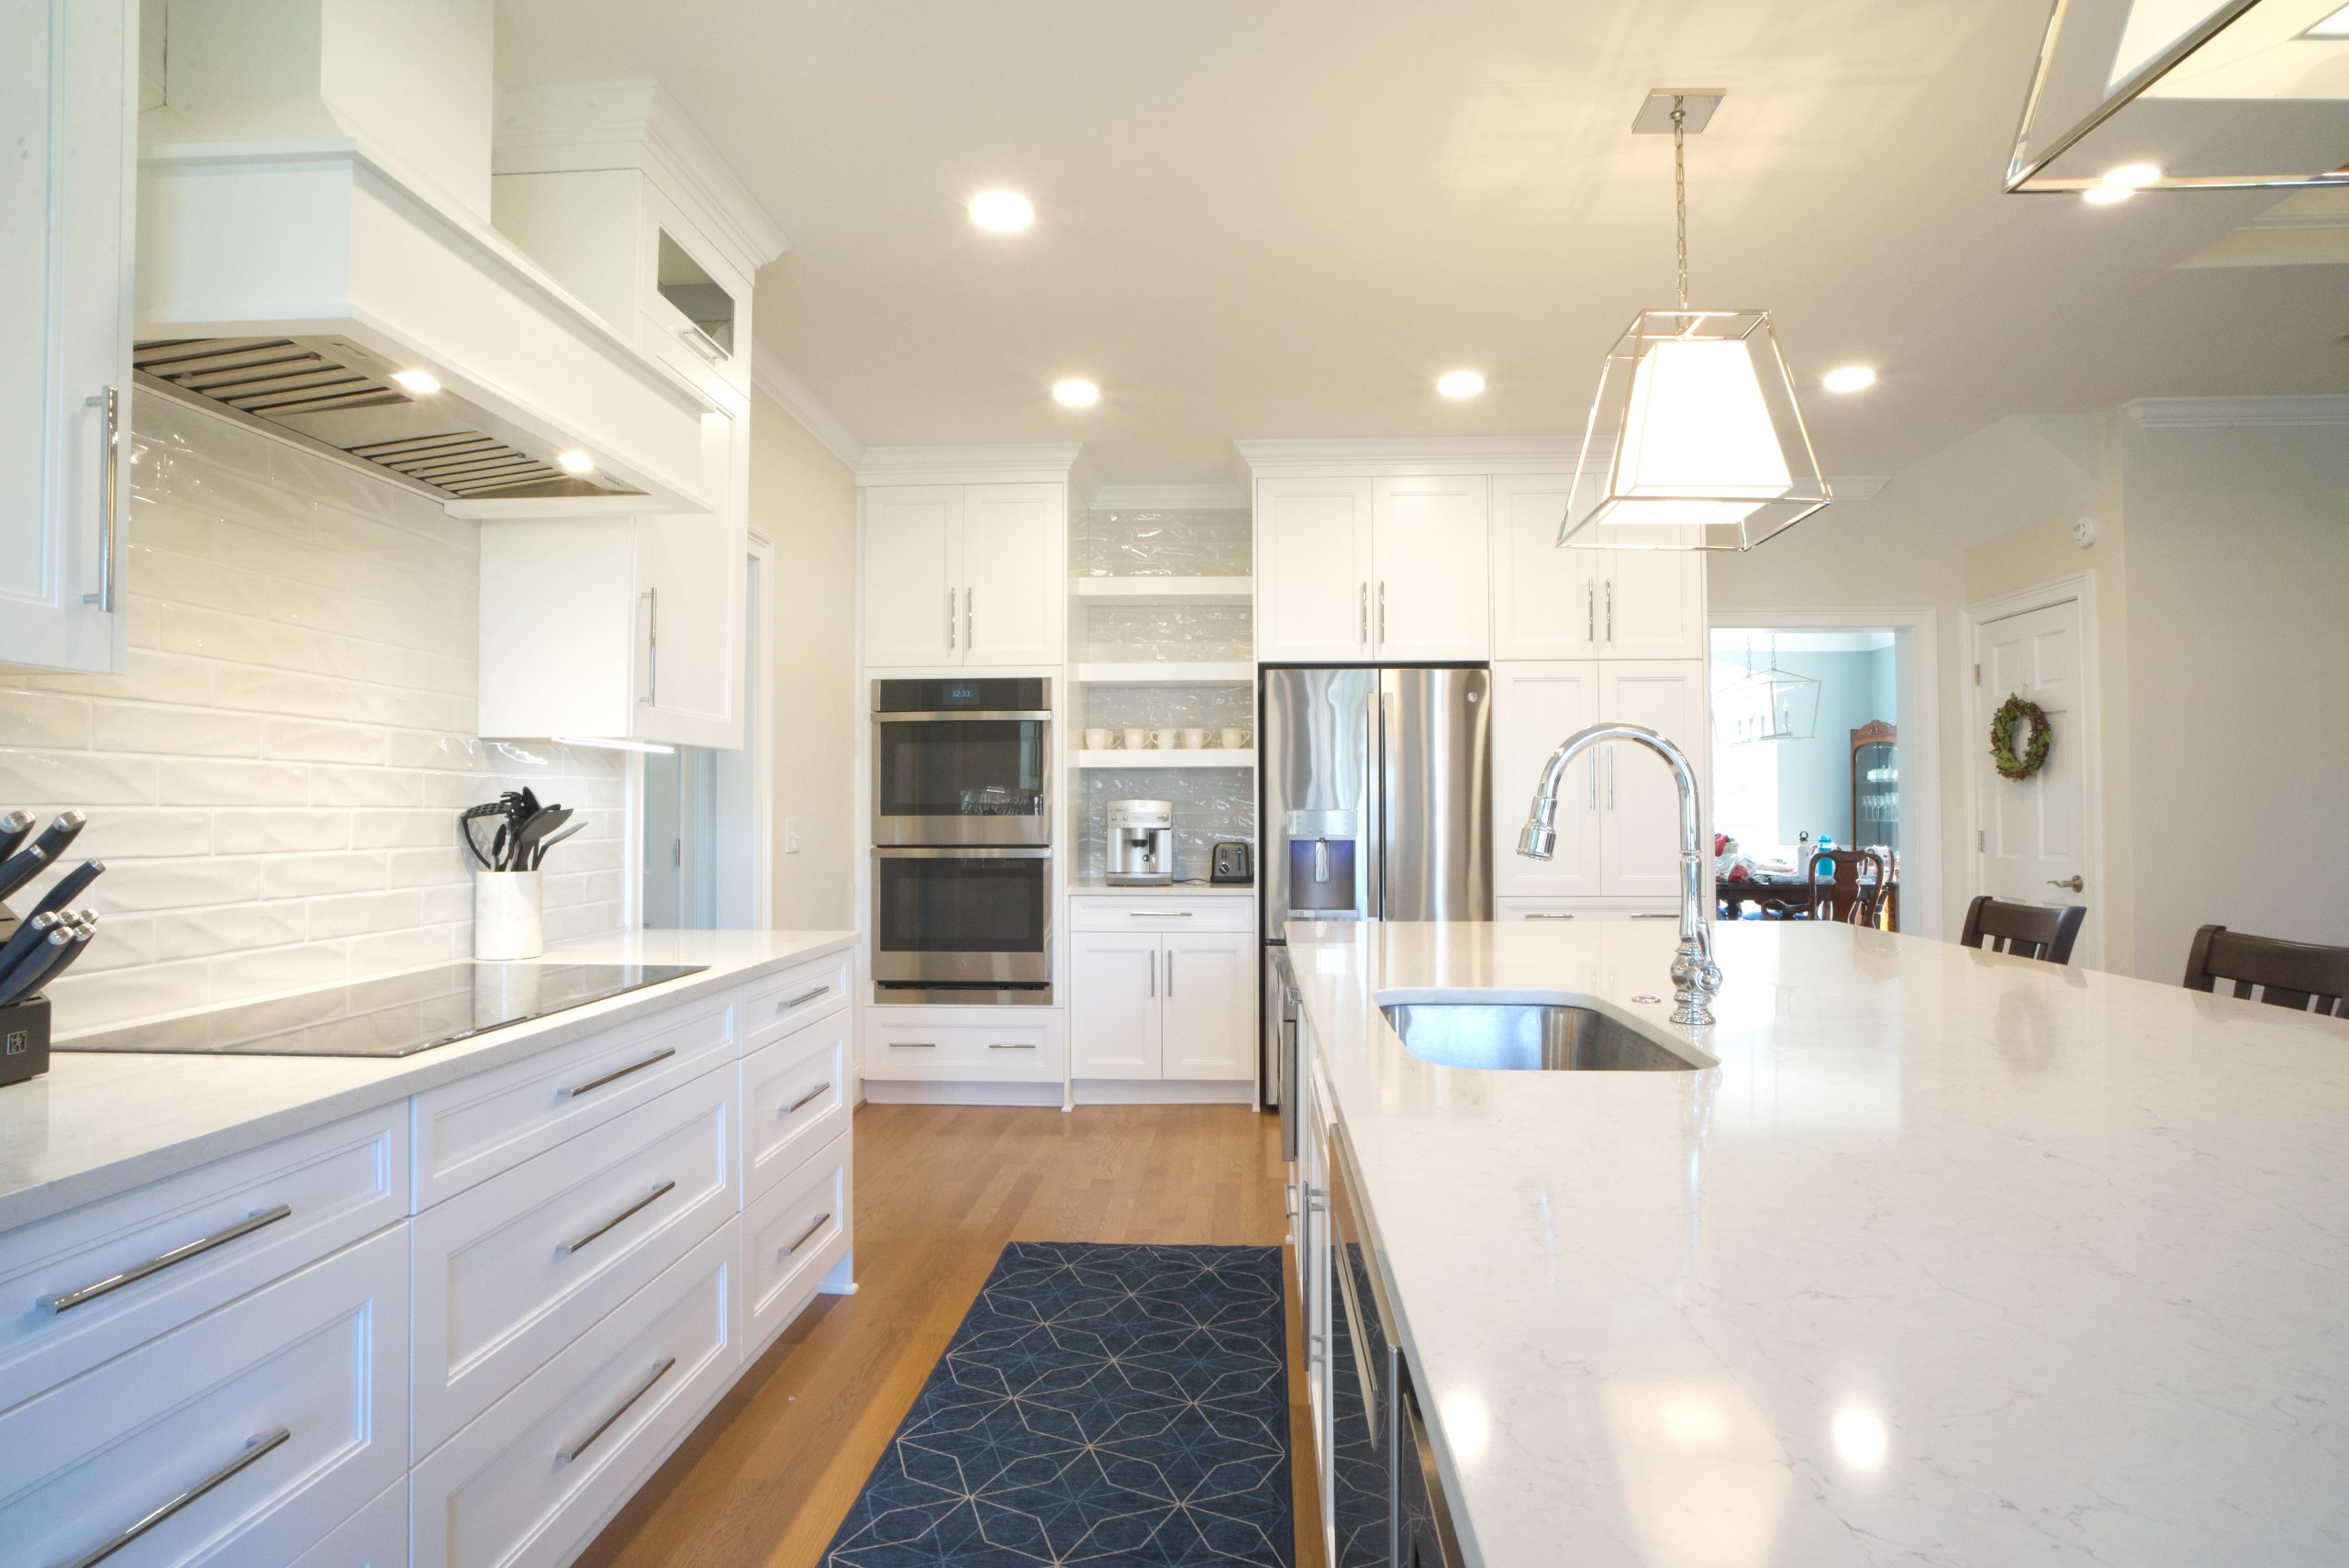 Open floor plan kitchen remodel with classic white and chrome fixture in Morrisville, NC